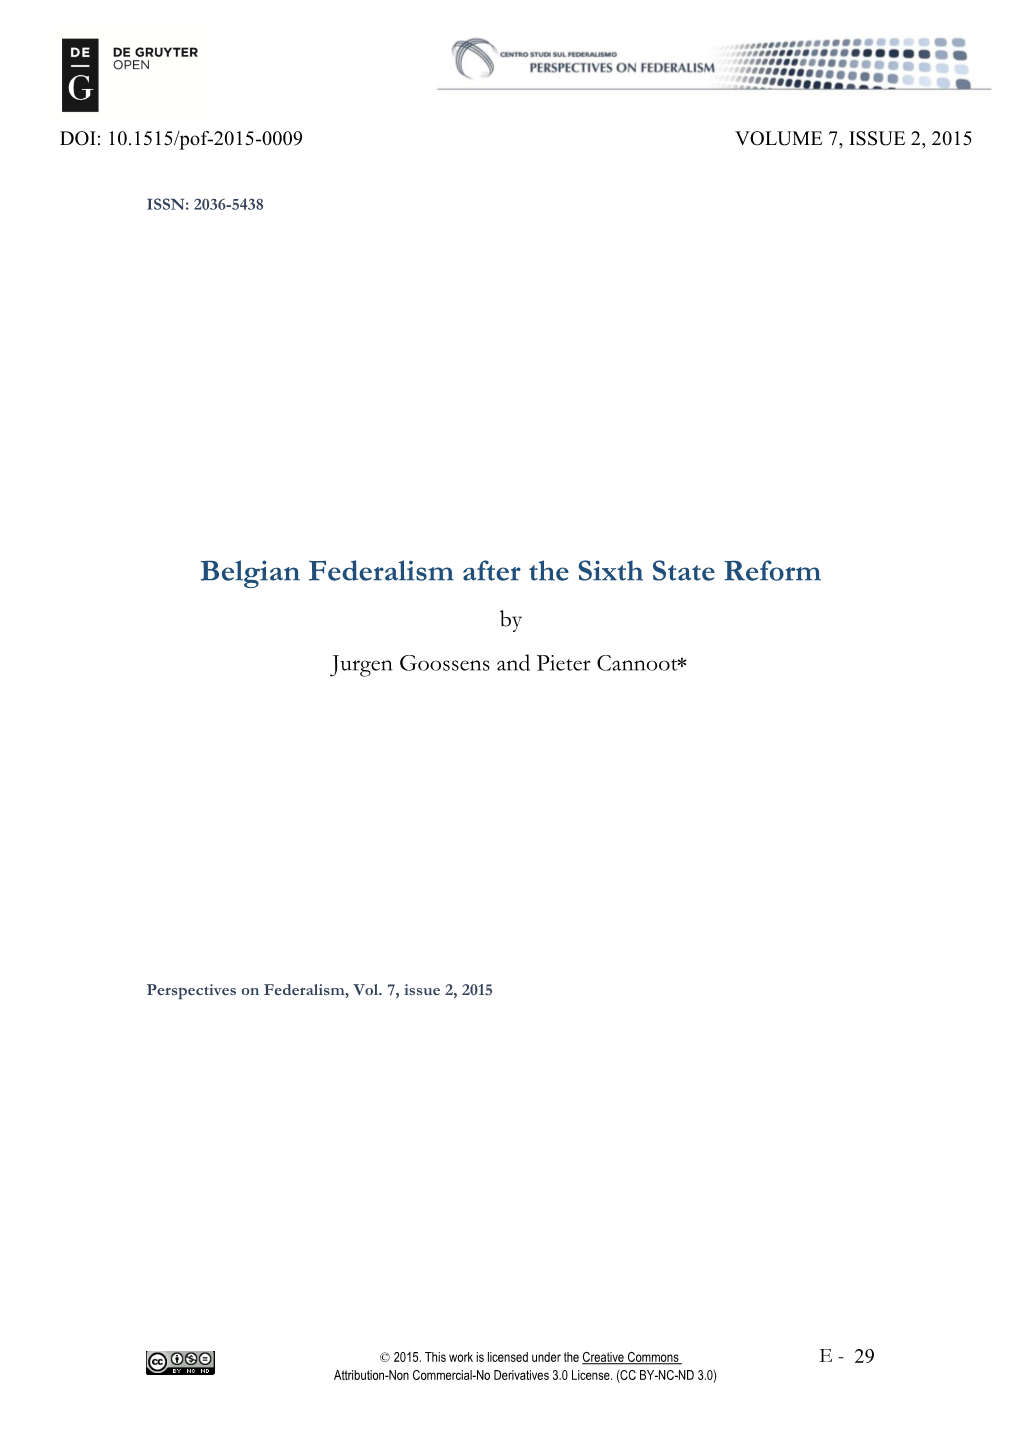 Belgian Federalism After the Sixth State Reform by Jurgen Goossens and Pieter Cannoot